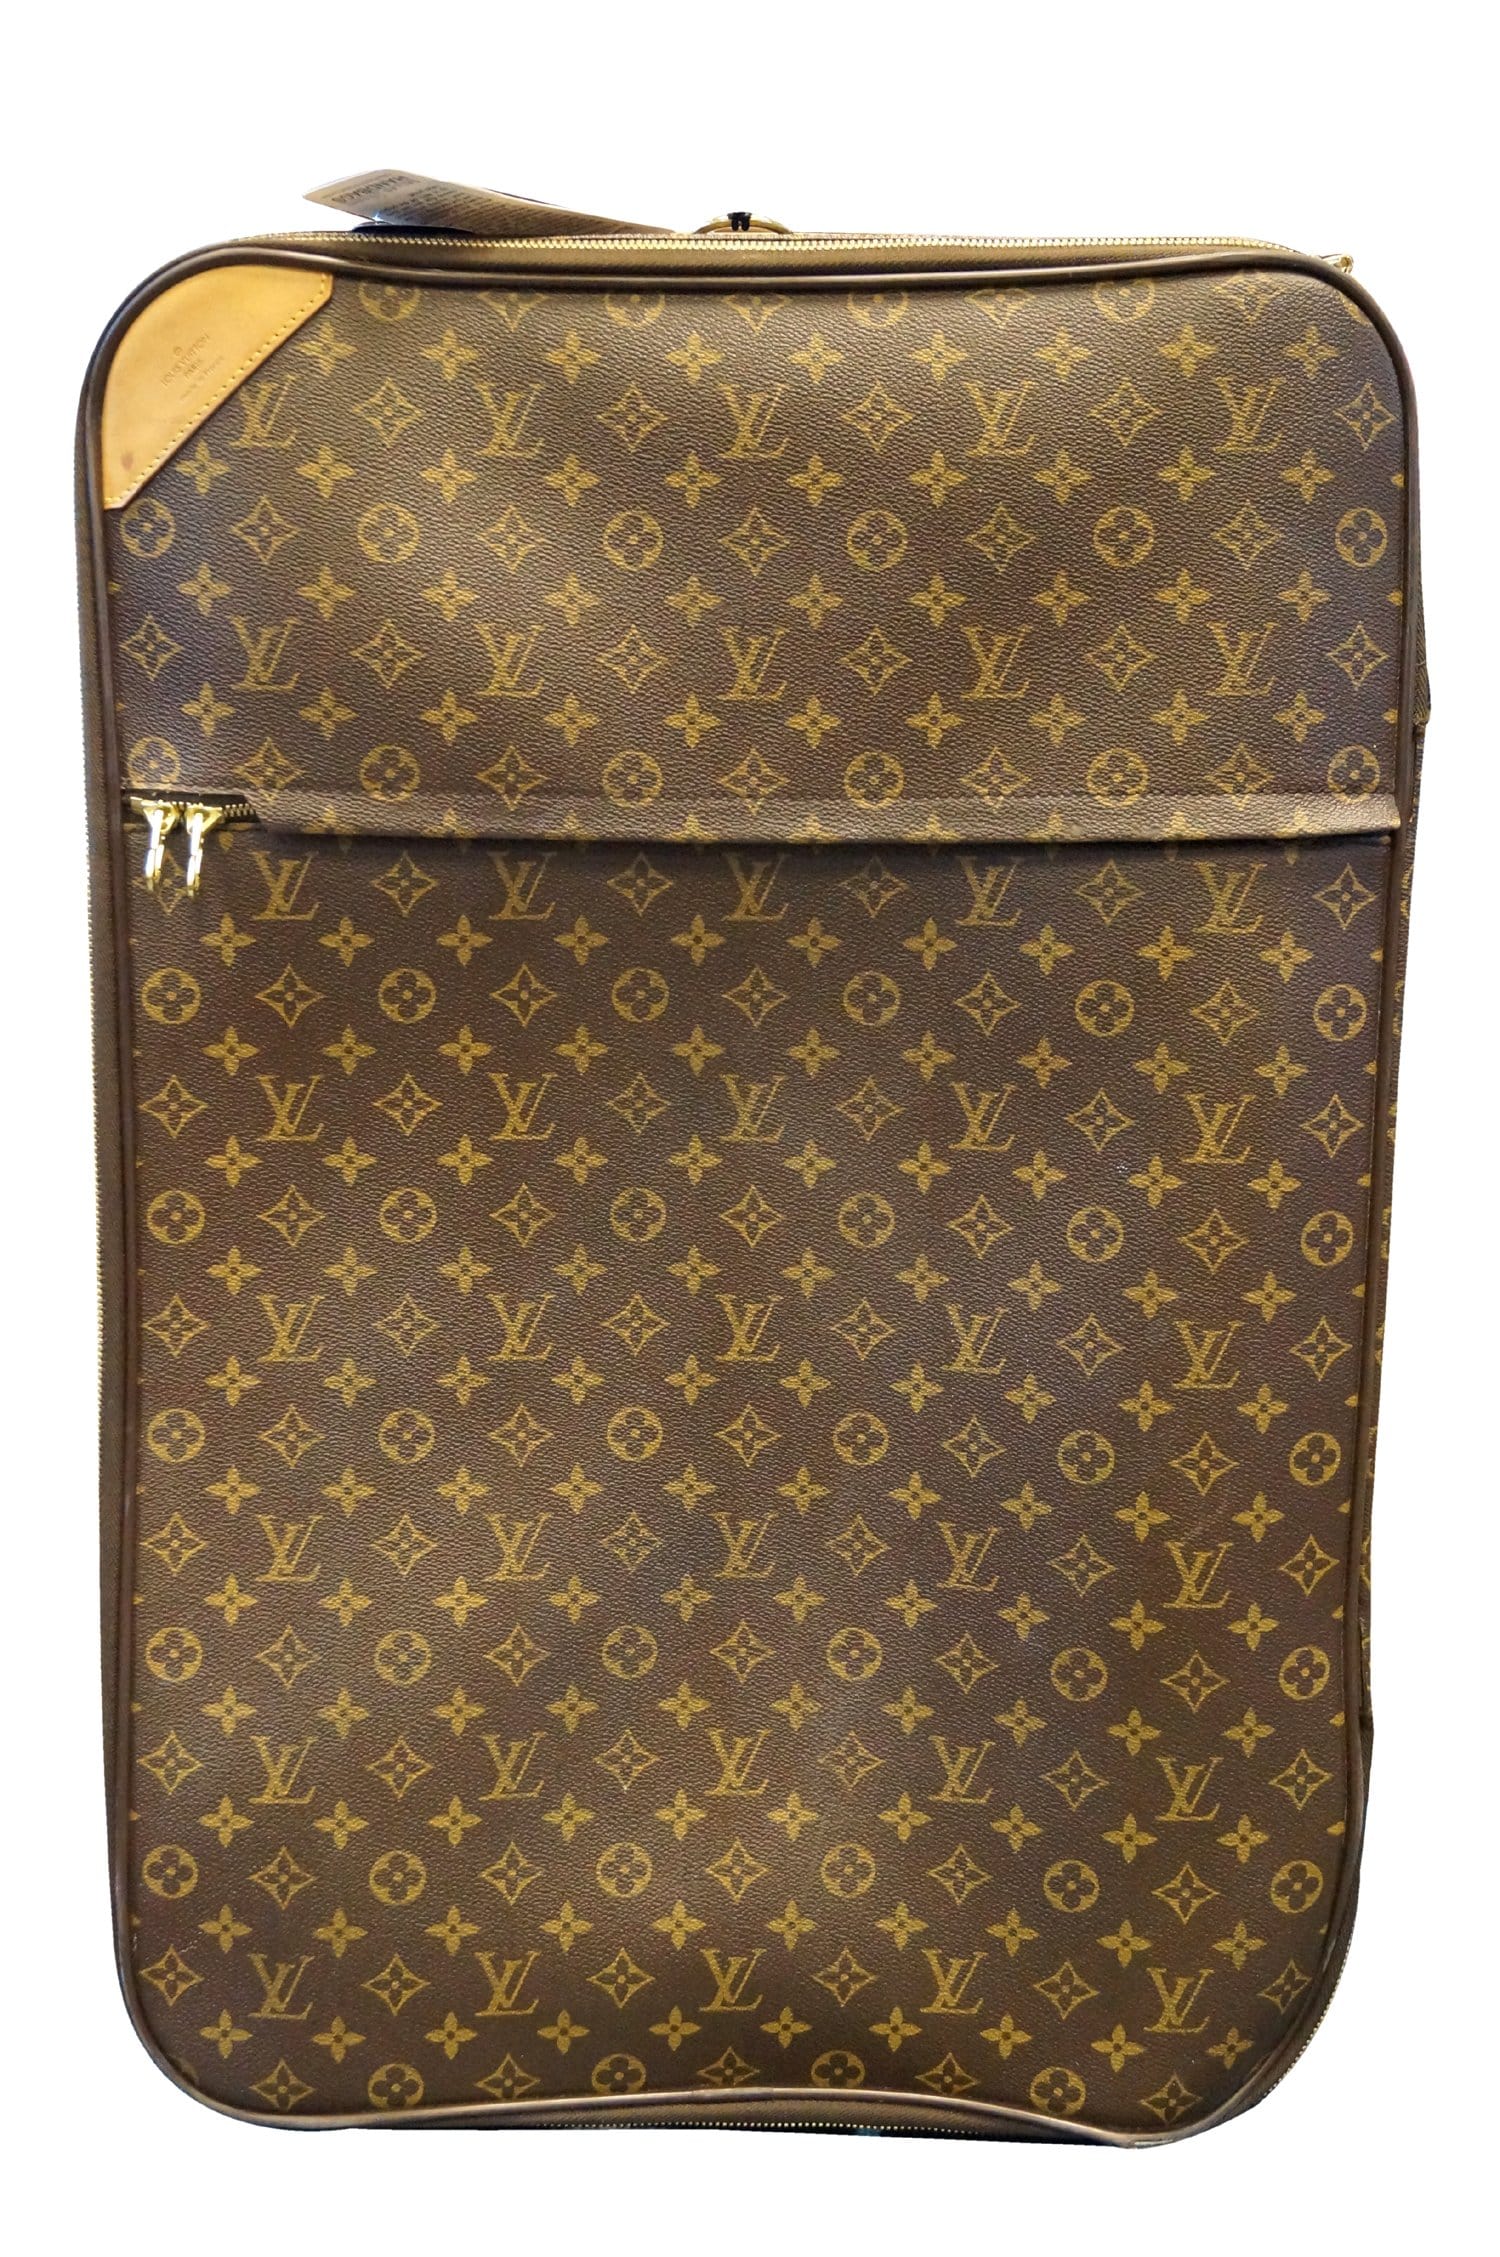 Louis Vuitton 2006 pre-owned Carry All Travel Bag - Farfetch